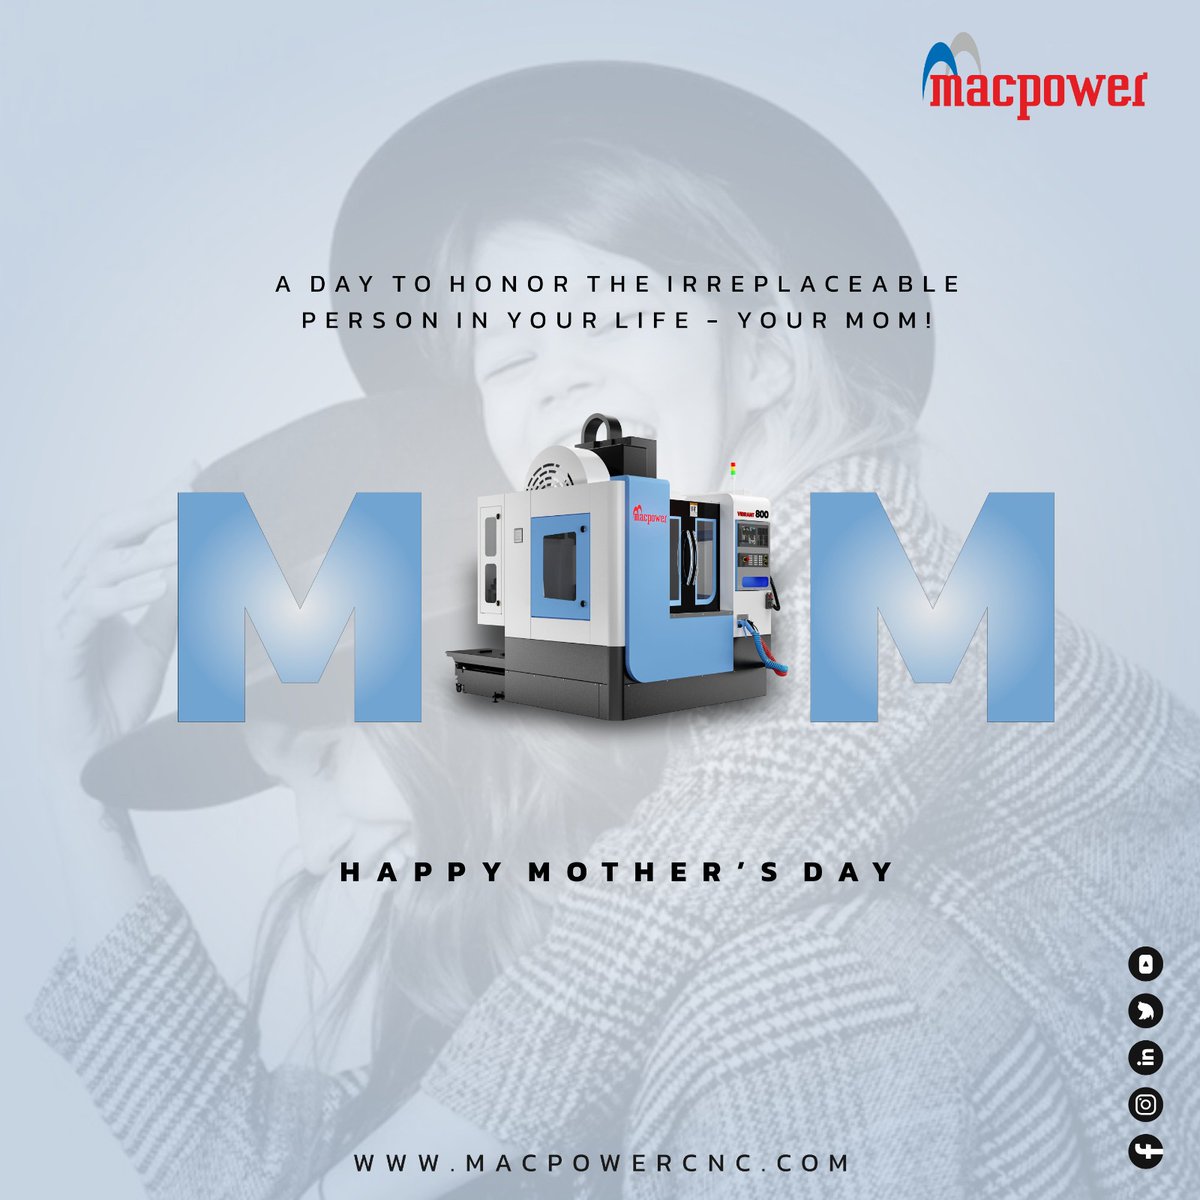 A Day To Honor The Irreplaceable Person In Yourlife - Your MOM...!!! Macpower Family Wishes You the Happy Mother's Day...!!!
#gujarat #machine #VMC #MACHINETOOLS #tooling #cnc #technology #macpower #MothersDay